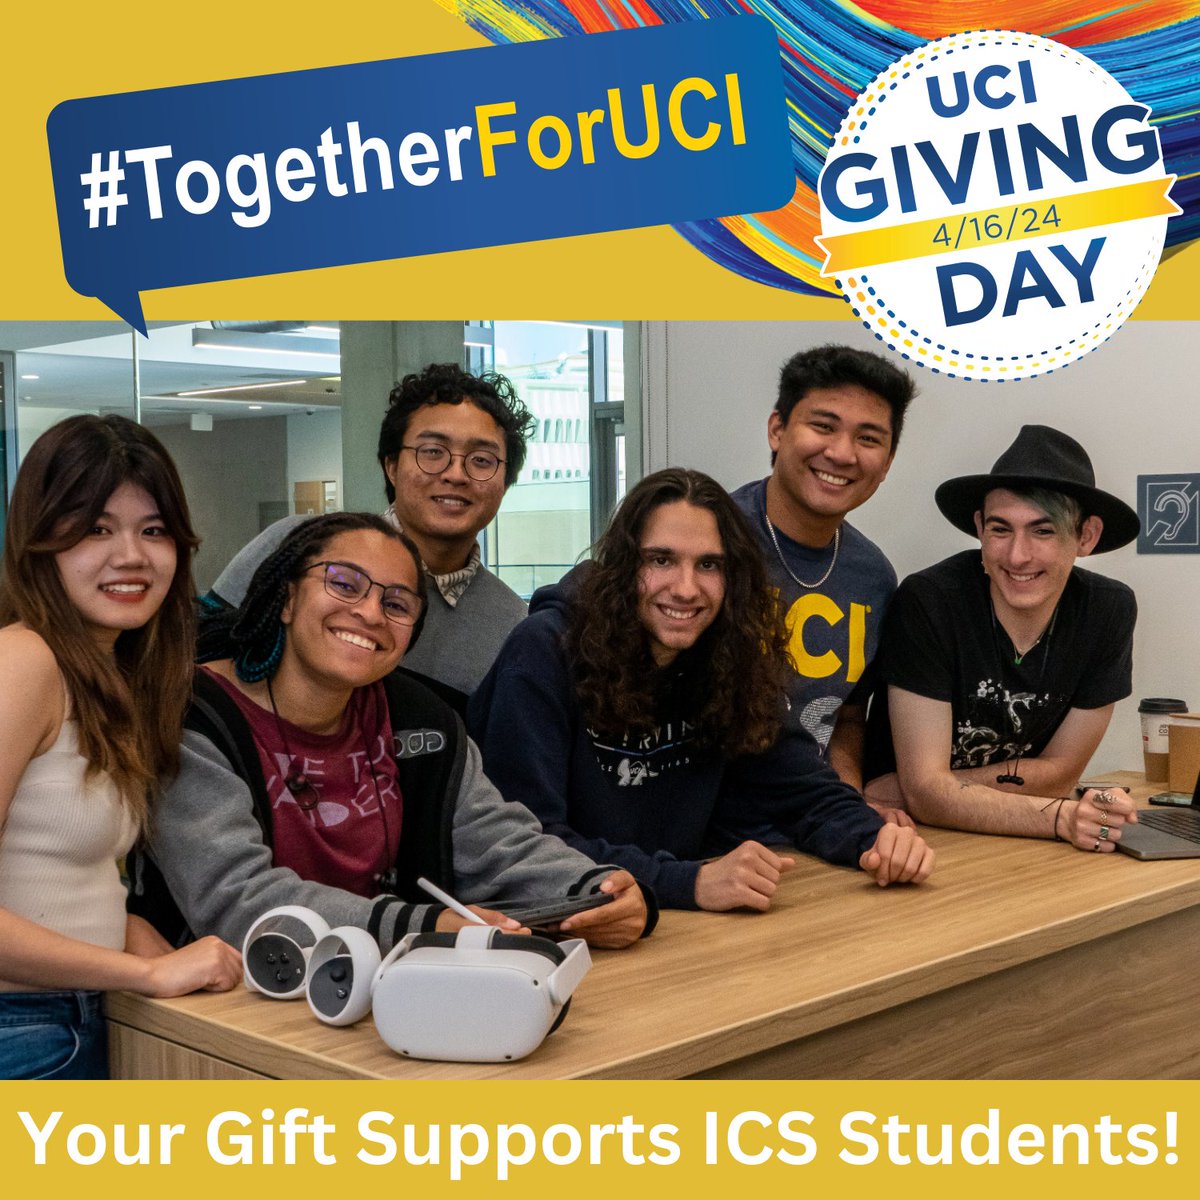 ⭐ Giving Day is Today! ⭐

Together we’re making a difference! Every gift counts, so continue supporting ICS! Check out all the impactful ways you can contribute to UCI ICS students right now: bit.ly/UCIgivingday20…

#TogetherForUCI #UCIGiving #UCIICS #UCIGivingDay